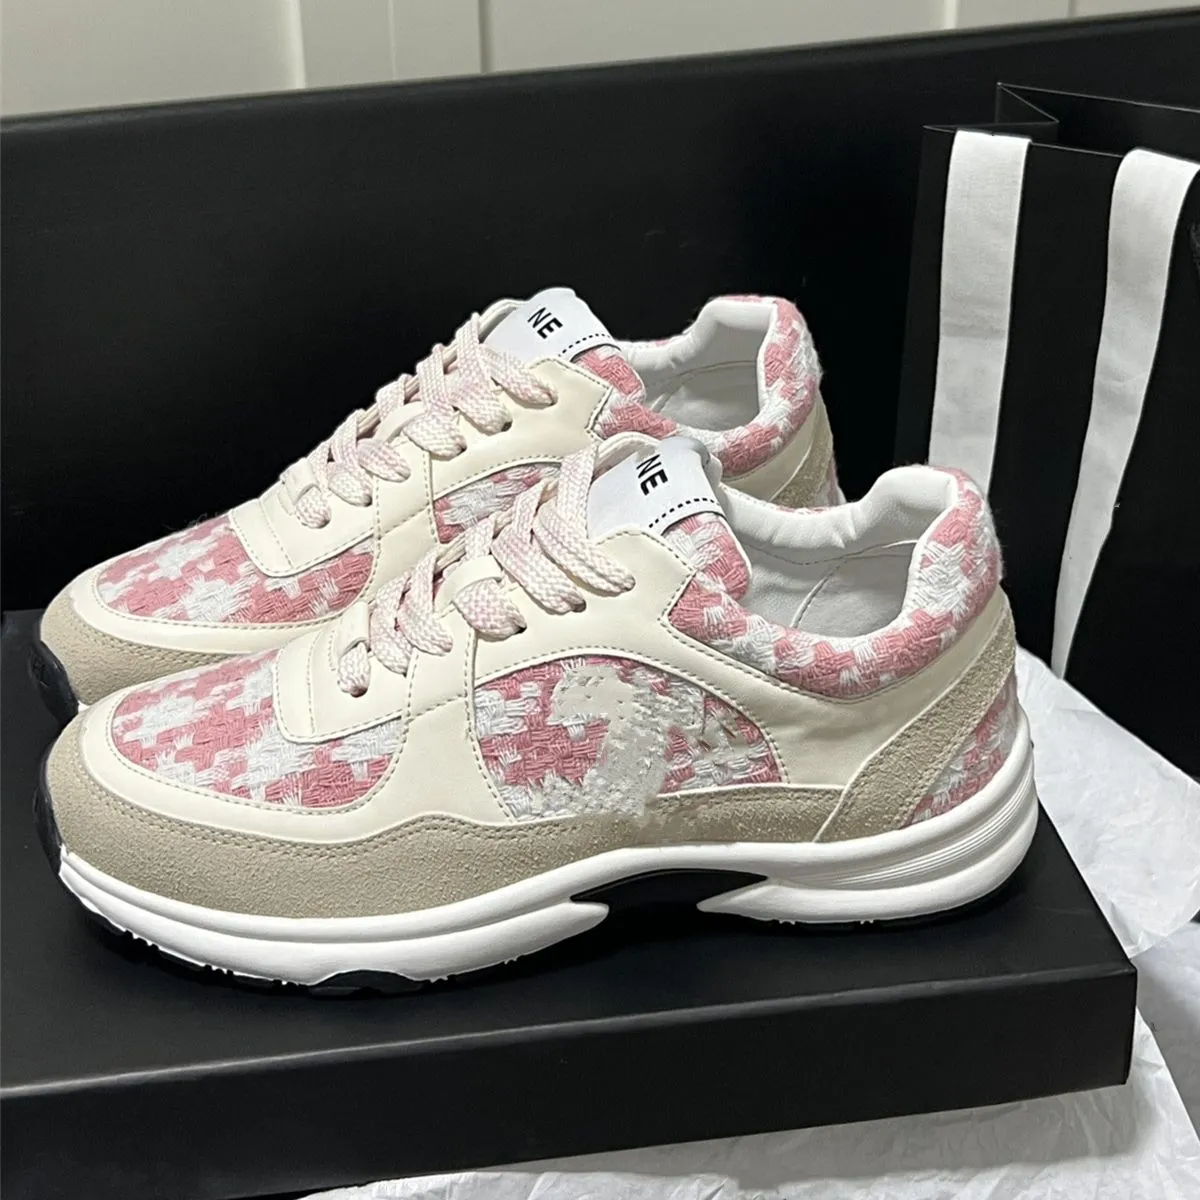 2024 New Designer Running Shoes chanelshoes brand channel Sneakers Womens Luxury lace-up Casual shoes Classic Trainer Sdfsf Fabric Suede Effect City gsfs size 35-45